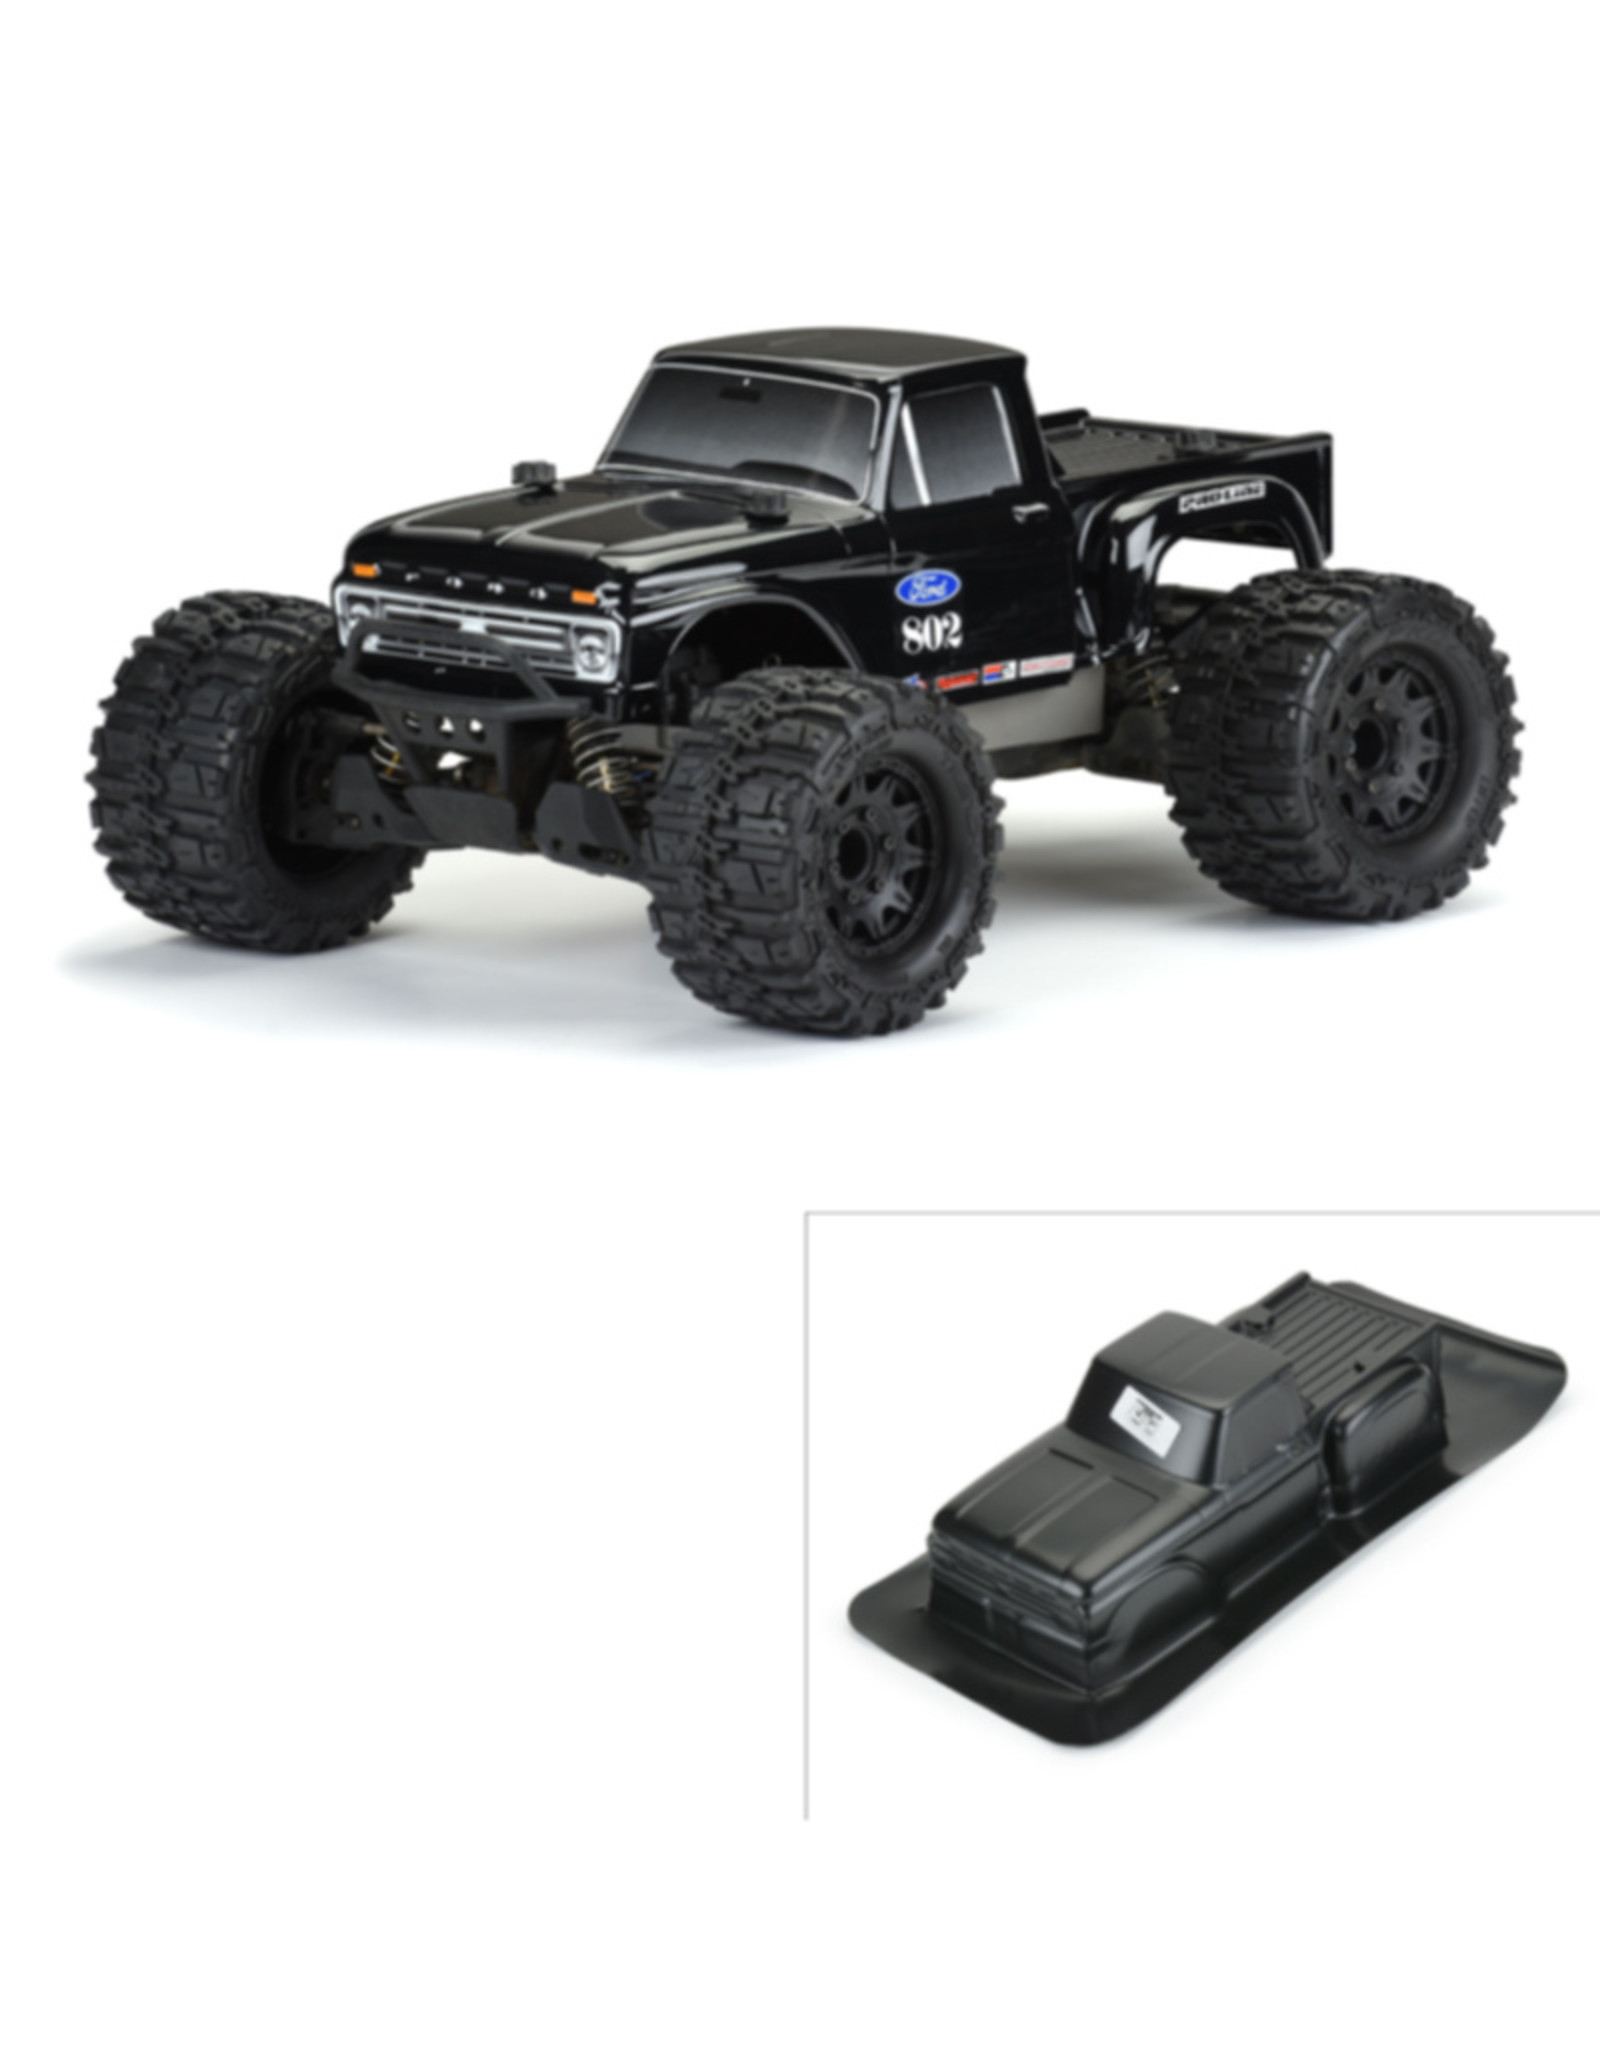 Pro-Line Racing PRO341218 1966 Ford F-100 (Black) Body for Stampede